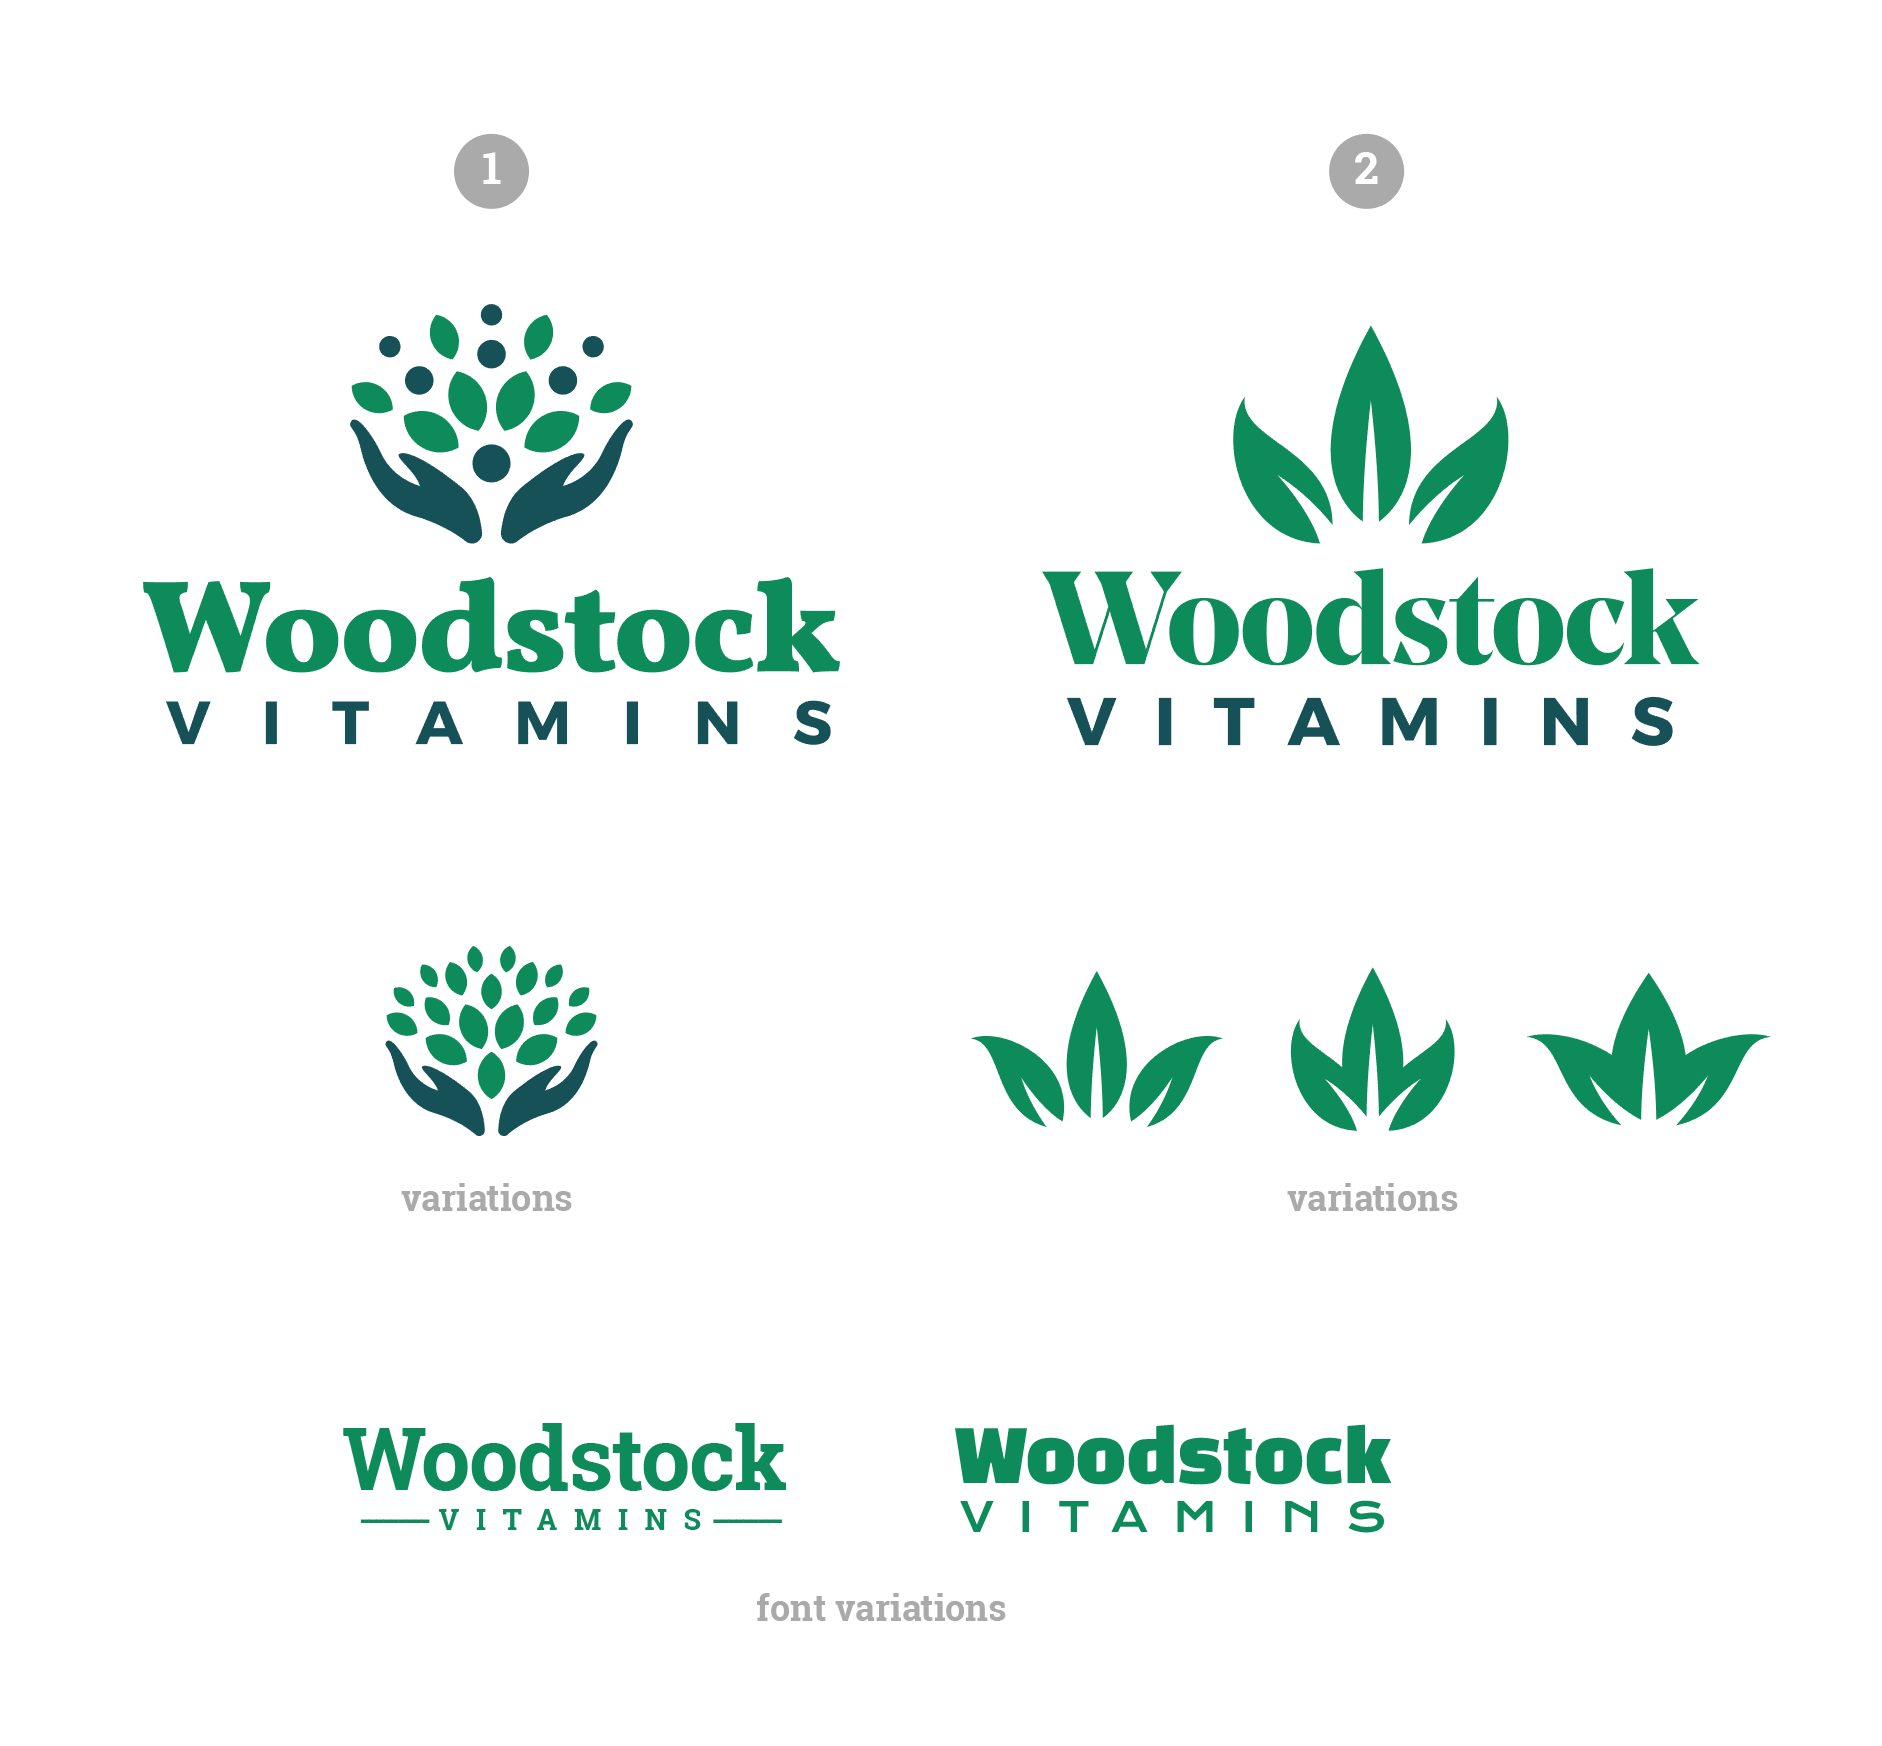 Vitamin Logo - Logo I'm working on for a local vitamin shop trying to position as